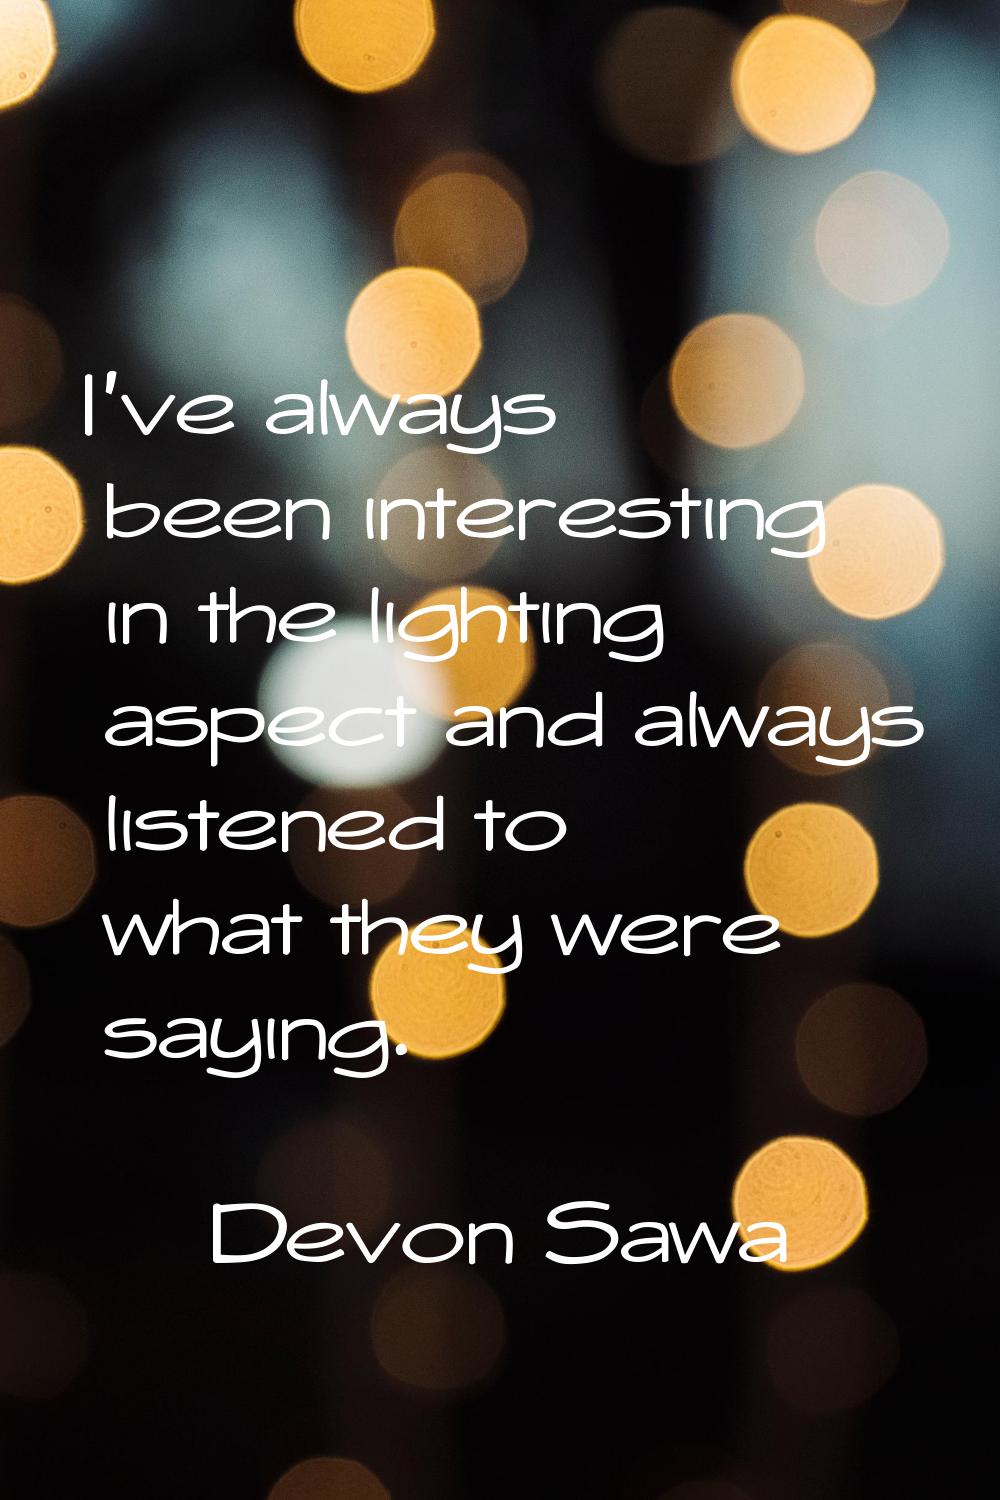 I've always been interesting in the lighting aspect and always listened to what they were saying.